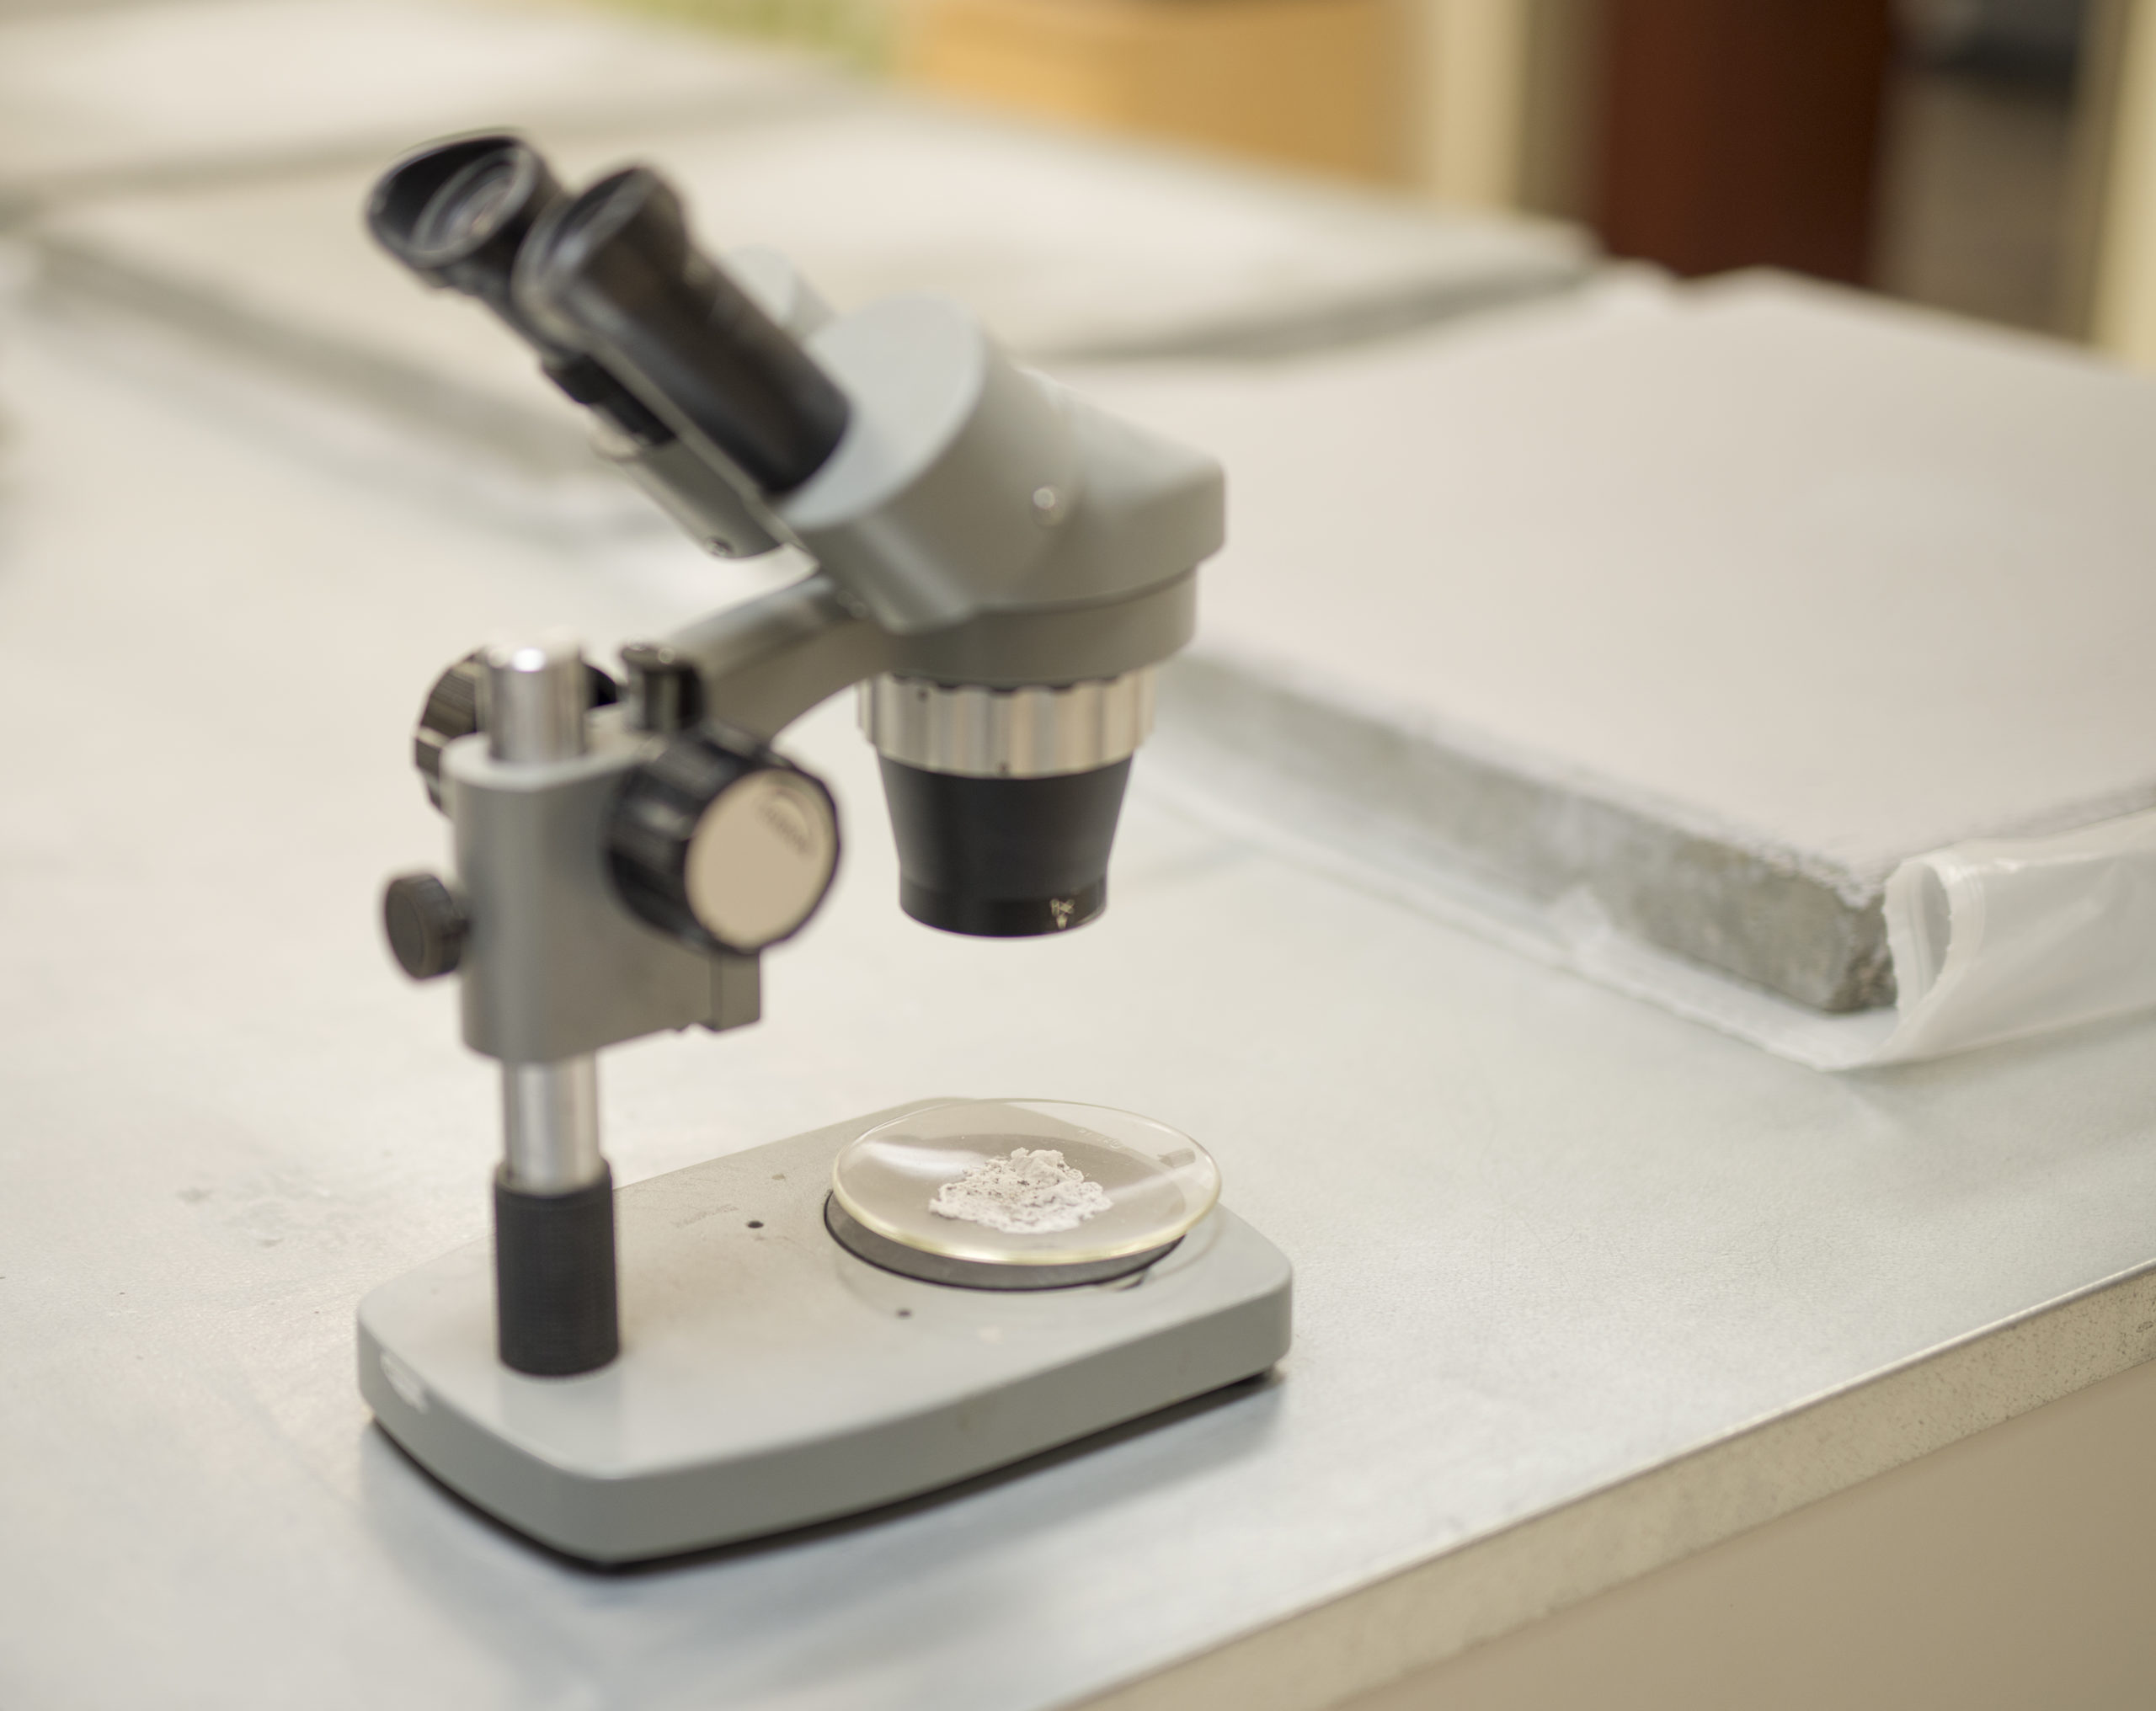 A microscope can be seen looking at some material, helping to change the future of concrete waterproofing.